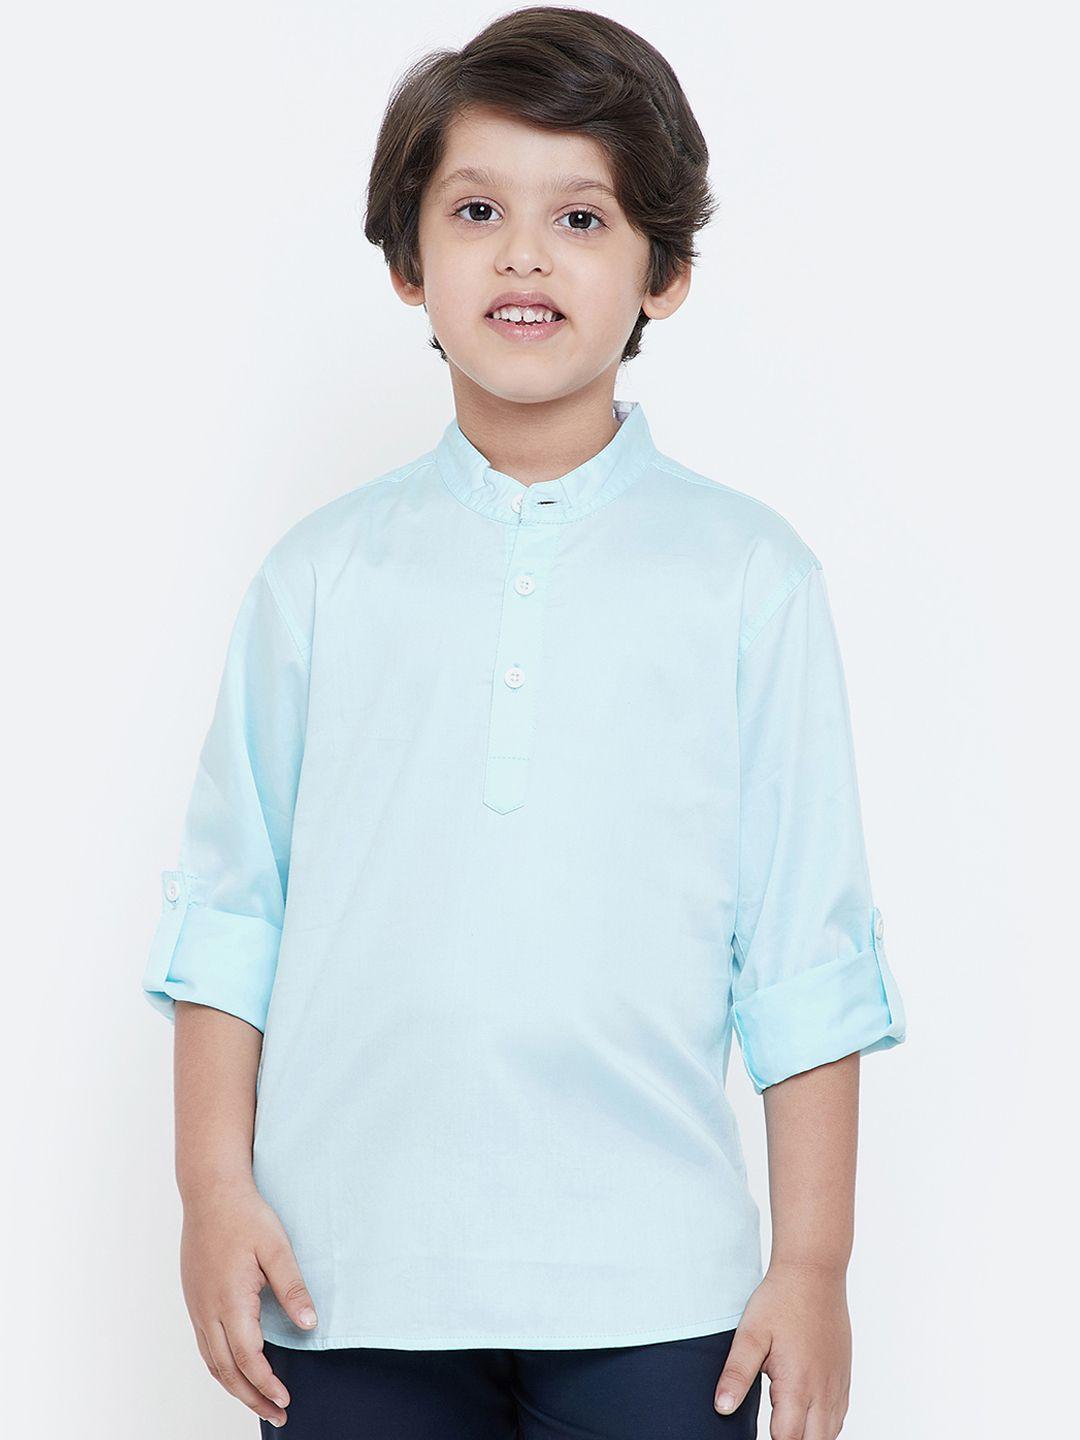 kidklo boys turquoise blue regular fit solid casual shirt